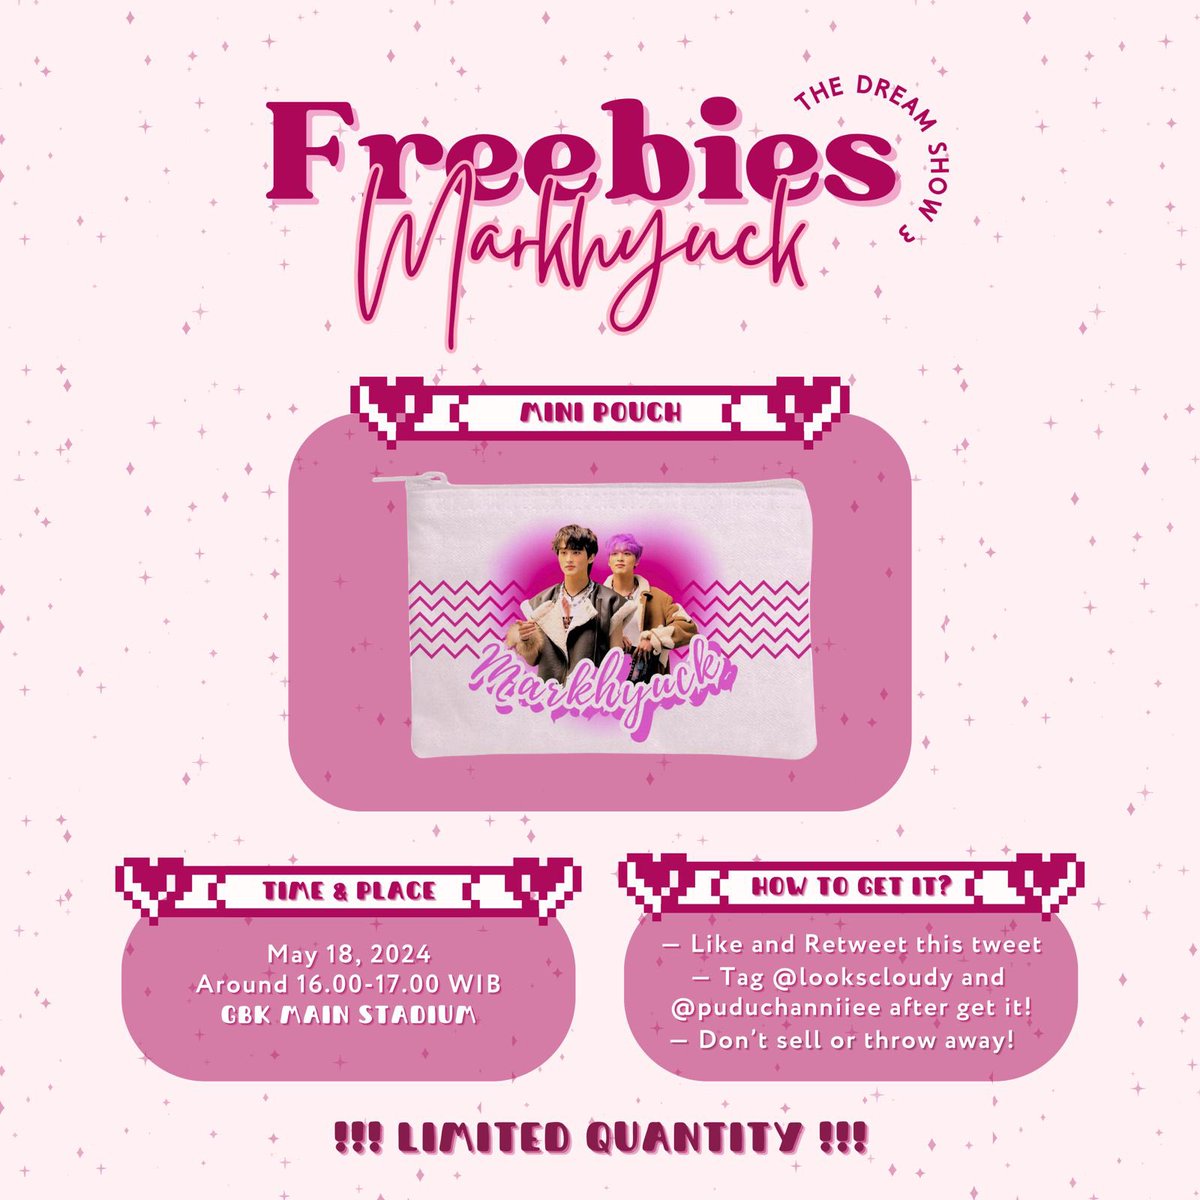 ✧・₊ Freebies TDS 3 in Jakarta ₊・✧
by @lookscloudy_ and @puduchanniiee

🗓️ May 18, 2024
📍 GBK
⏰ Around 16.00-17.00

✦ markhyuck freebies 
✦ find us and say ‘hi’
✦ like and retweet are very appreciated☺️

see u <3 
#THEDREAMSHOW3INJAKARTA #TDS3_IN_JAKARTA #TDS3INJAKARTA